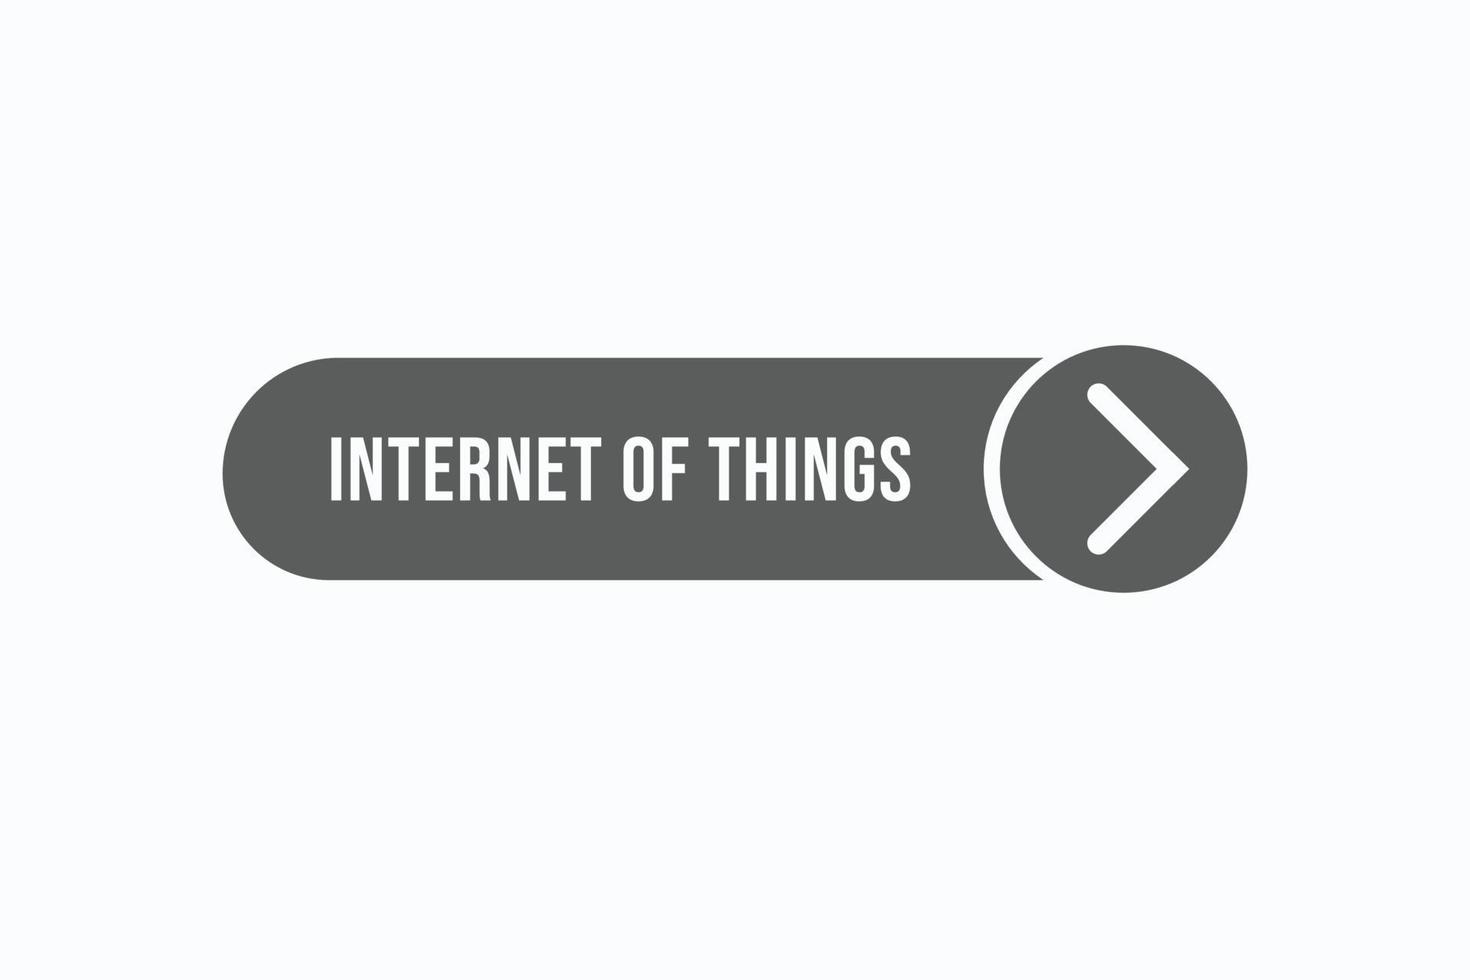 internet of things button vectors. sign label speech bubble internet of things vector